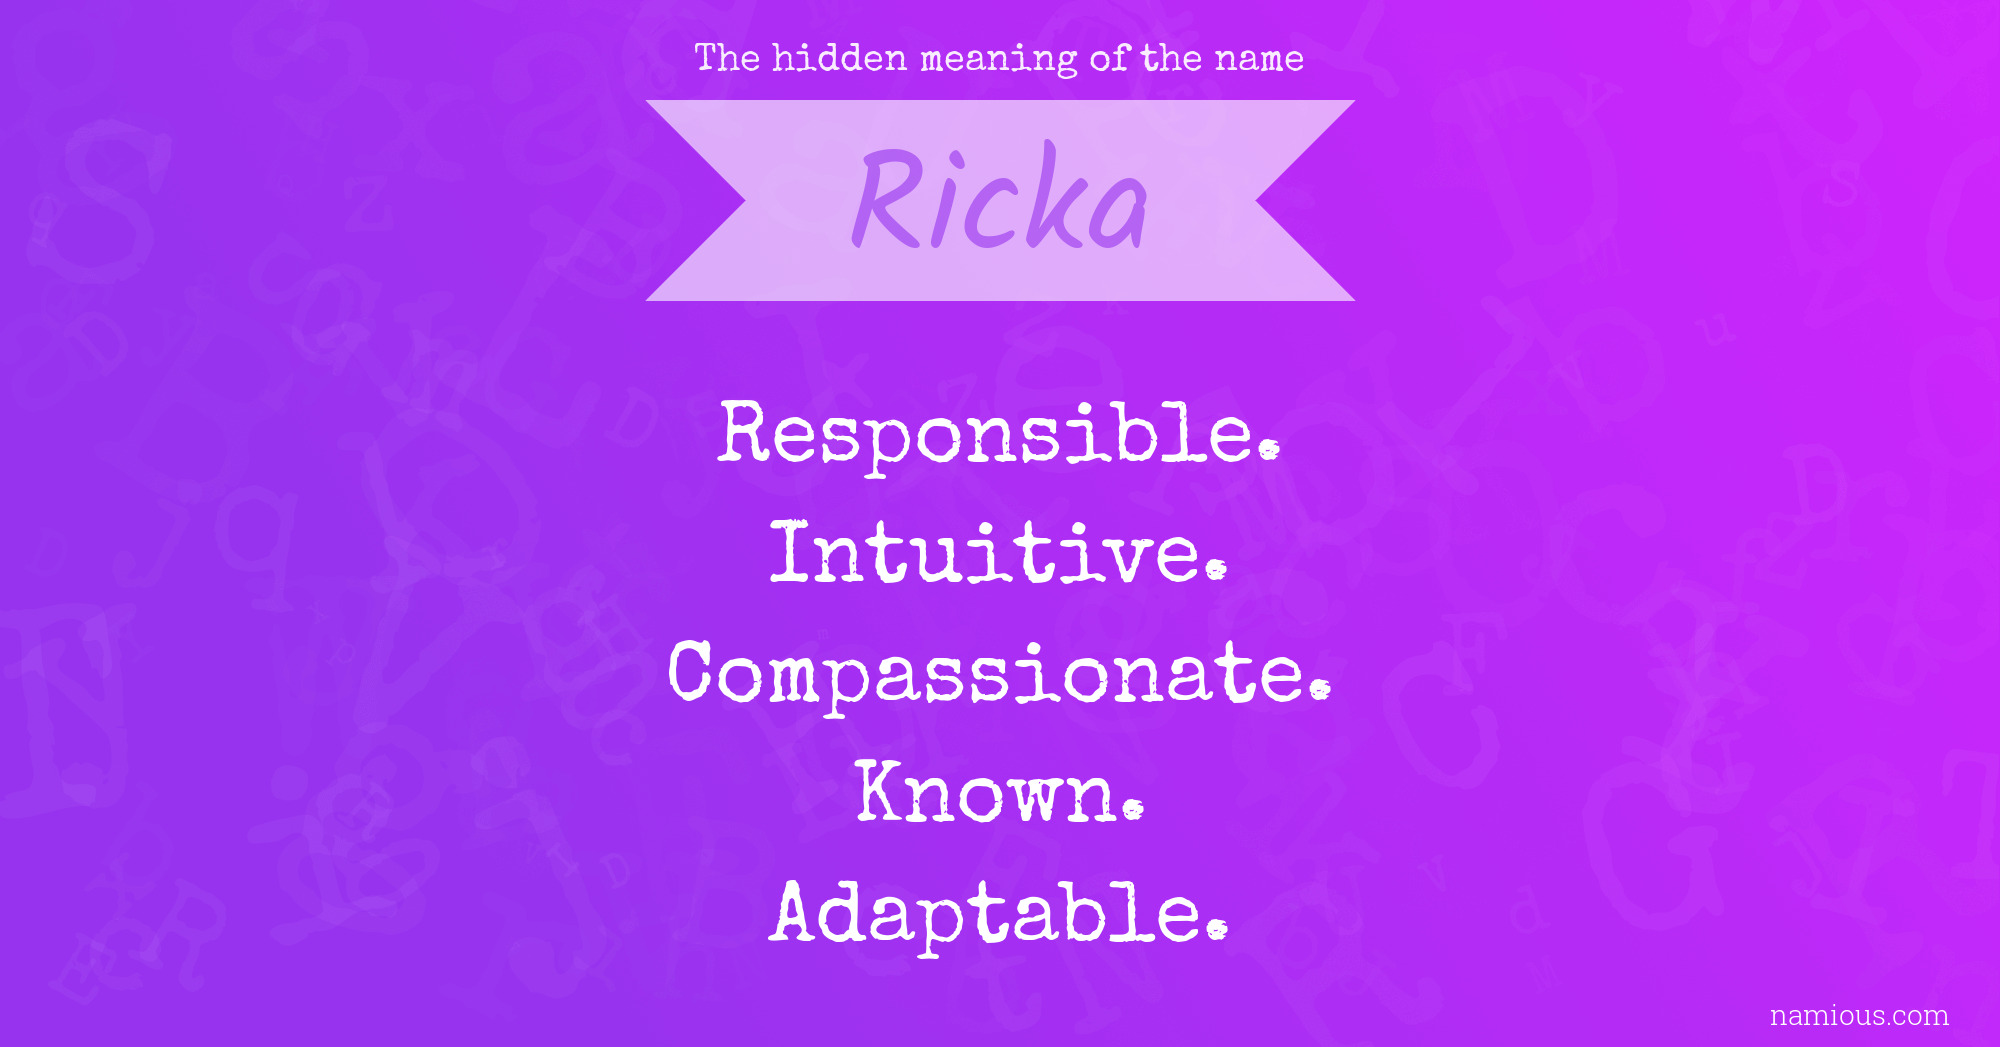 The hidden meaning of the name Ricka